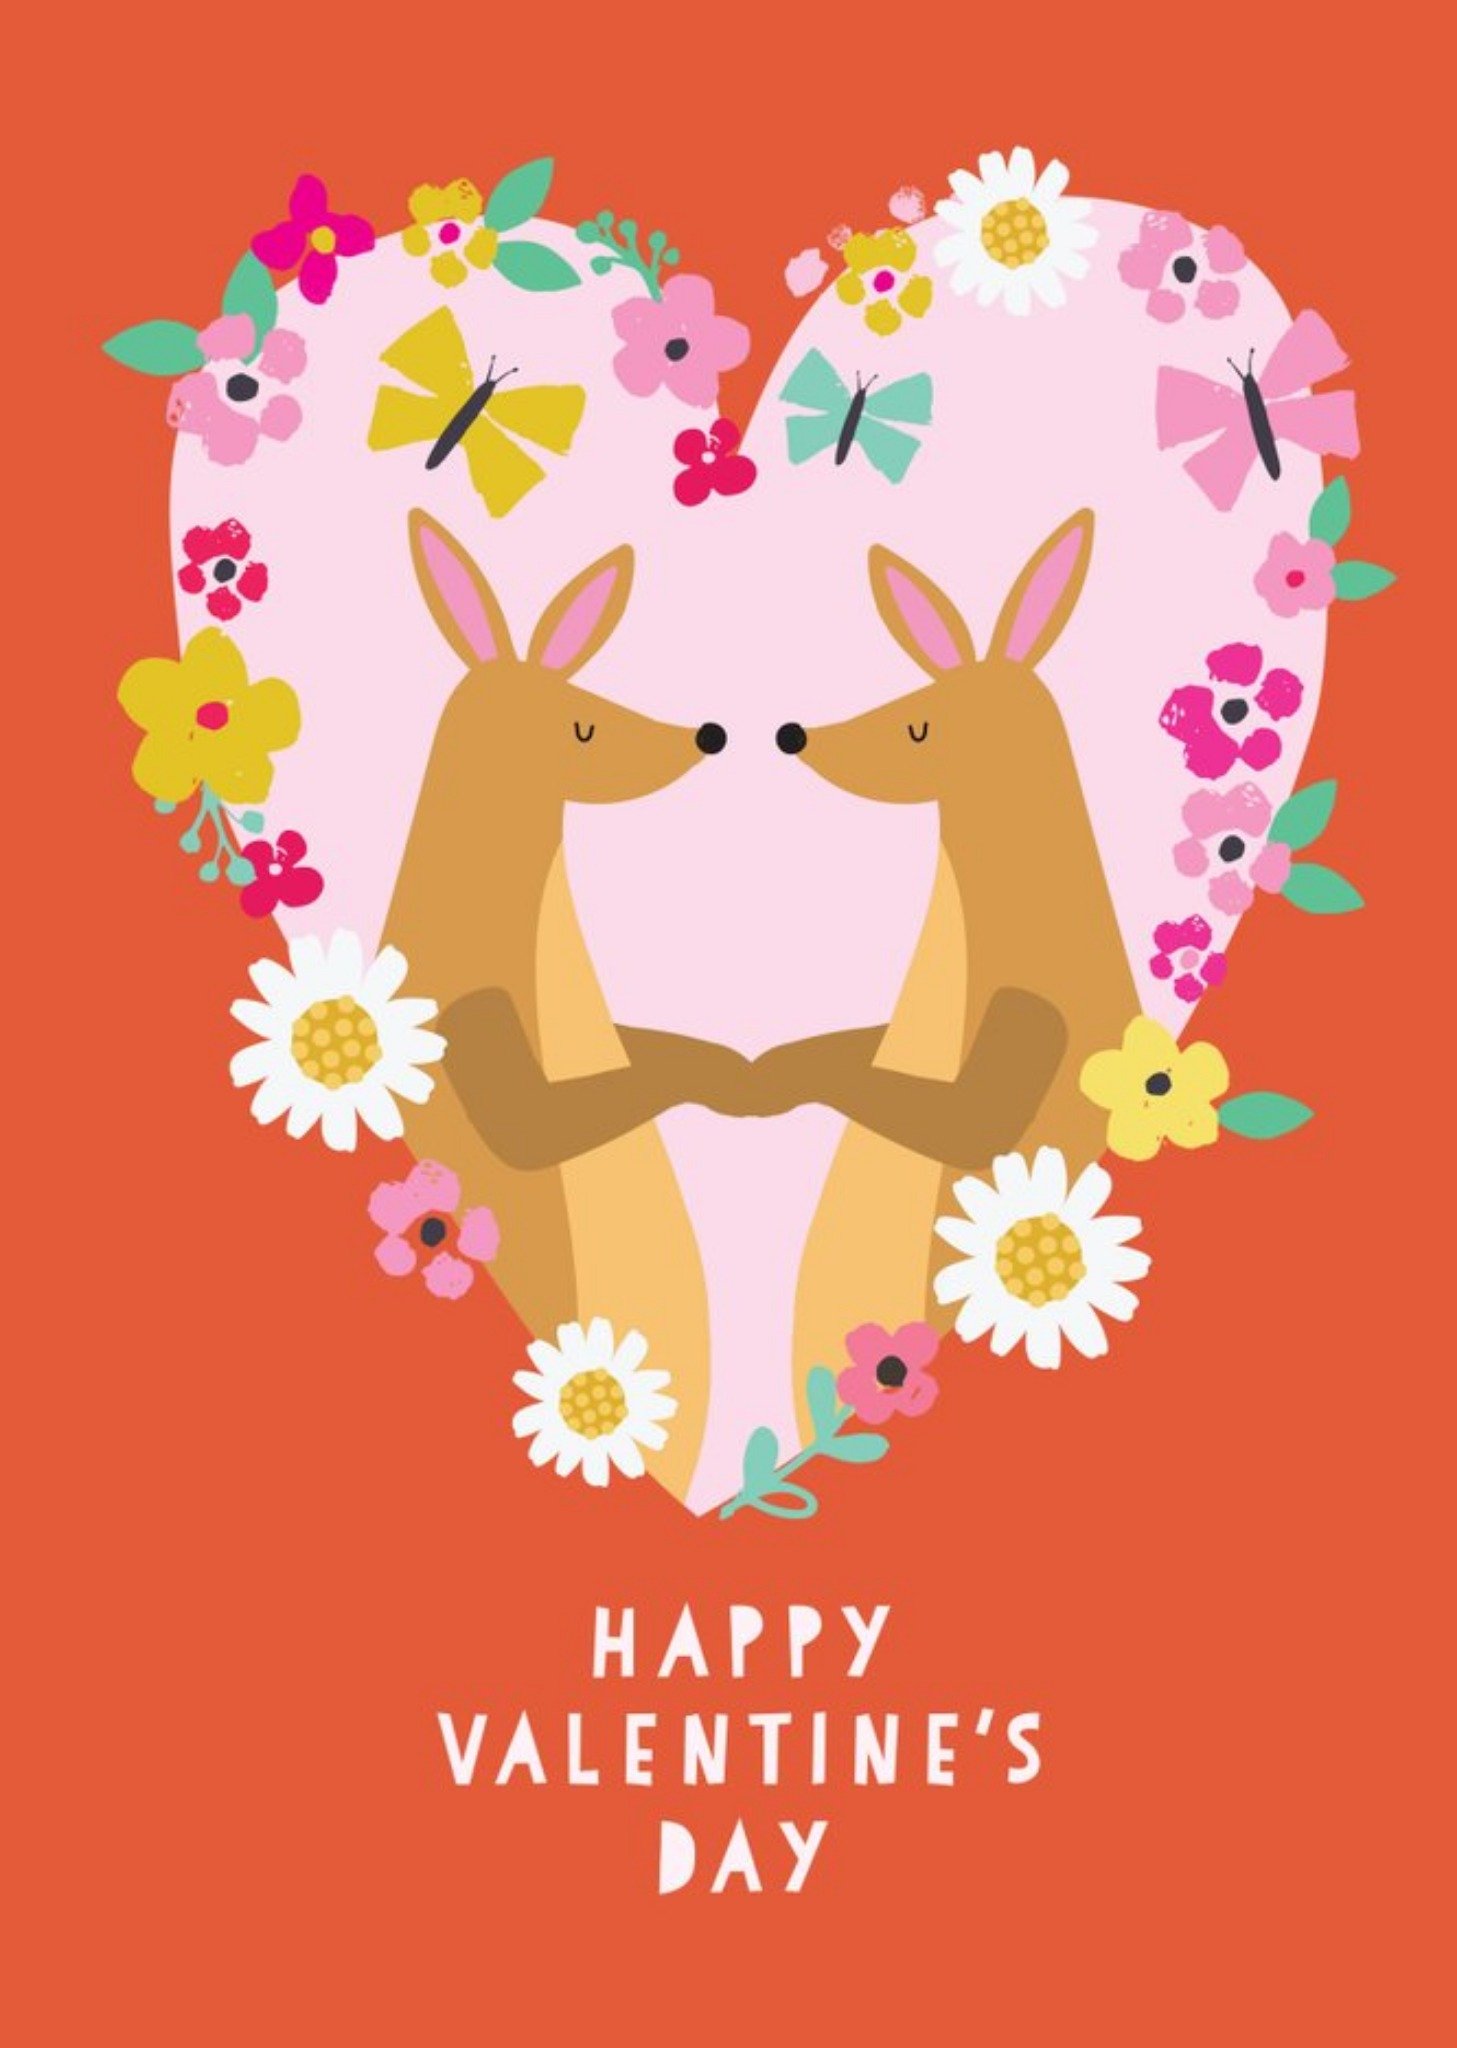 Moonpig Bright Colourful Illustration Of Two Kangaroos In A Loveheart Happy Valentine's Day Card Eca